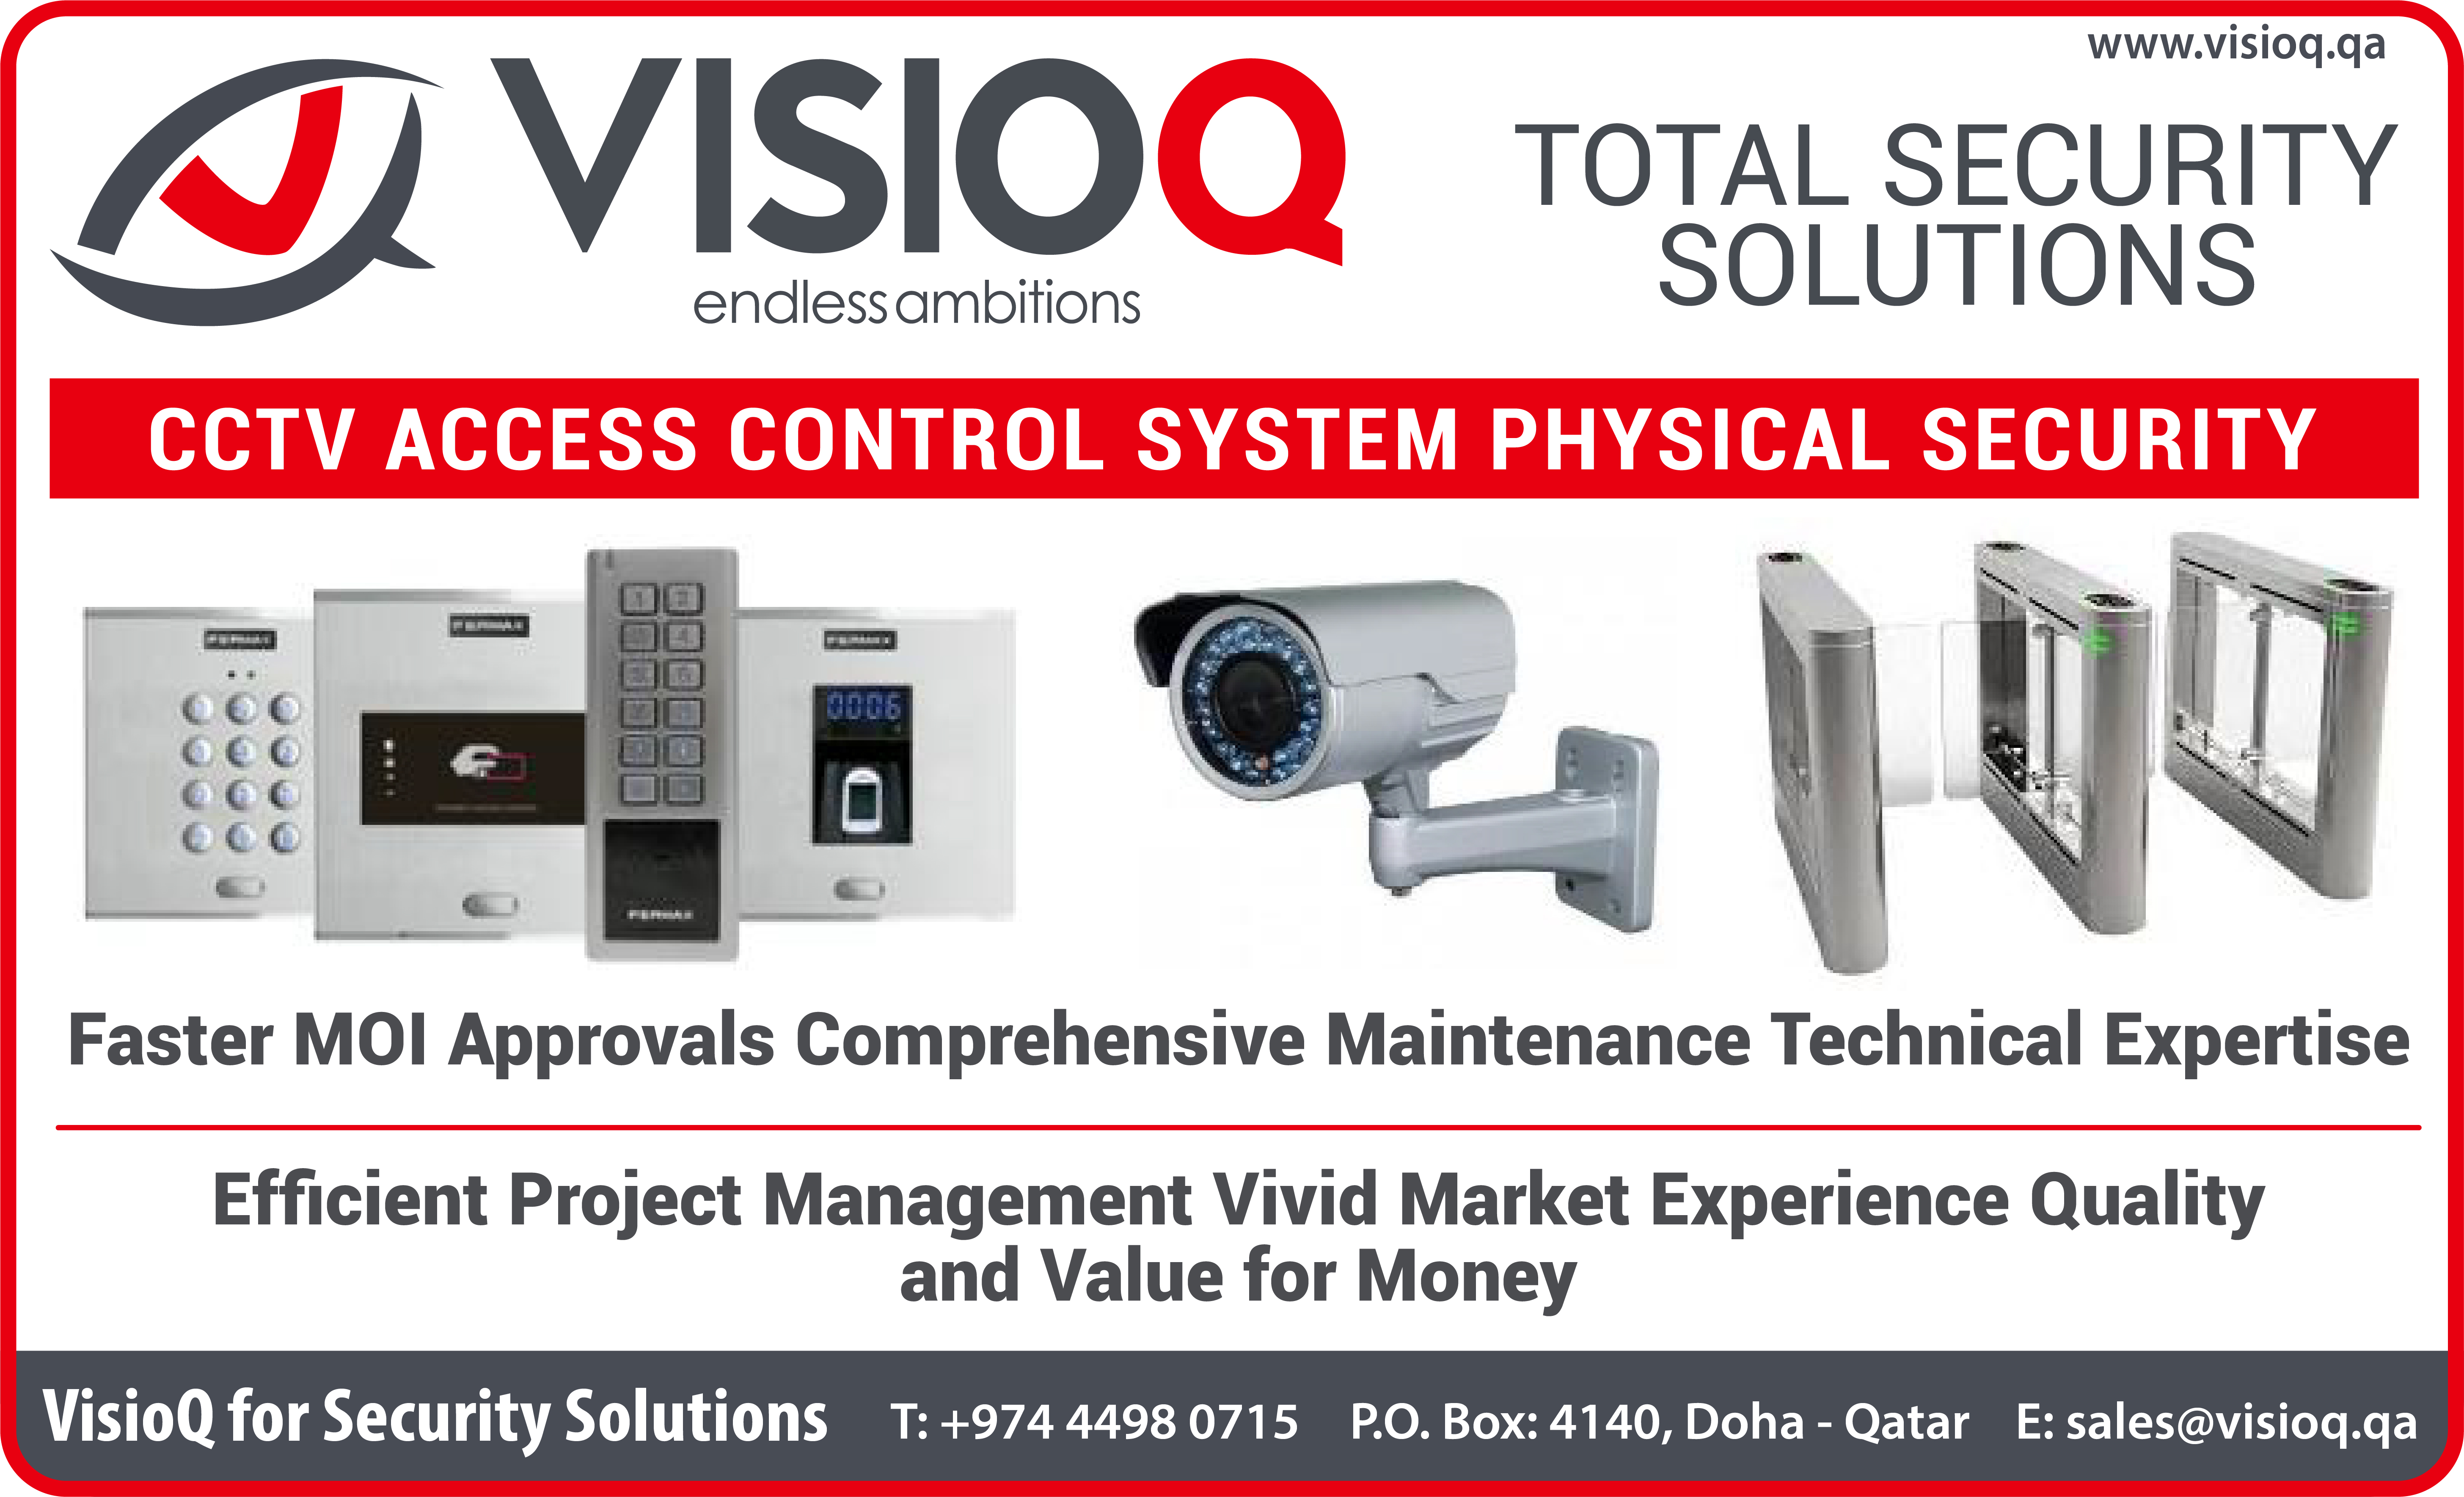 VISIOQ FOR SECURITY SOLUTIONS in Doha Qatar